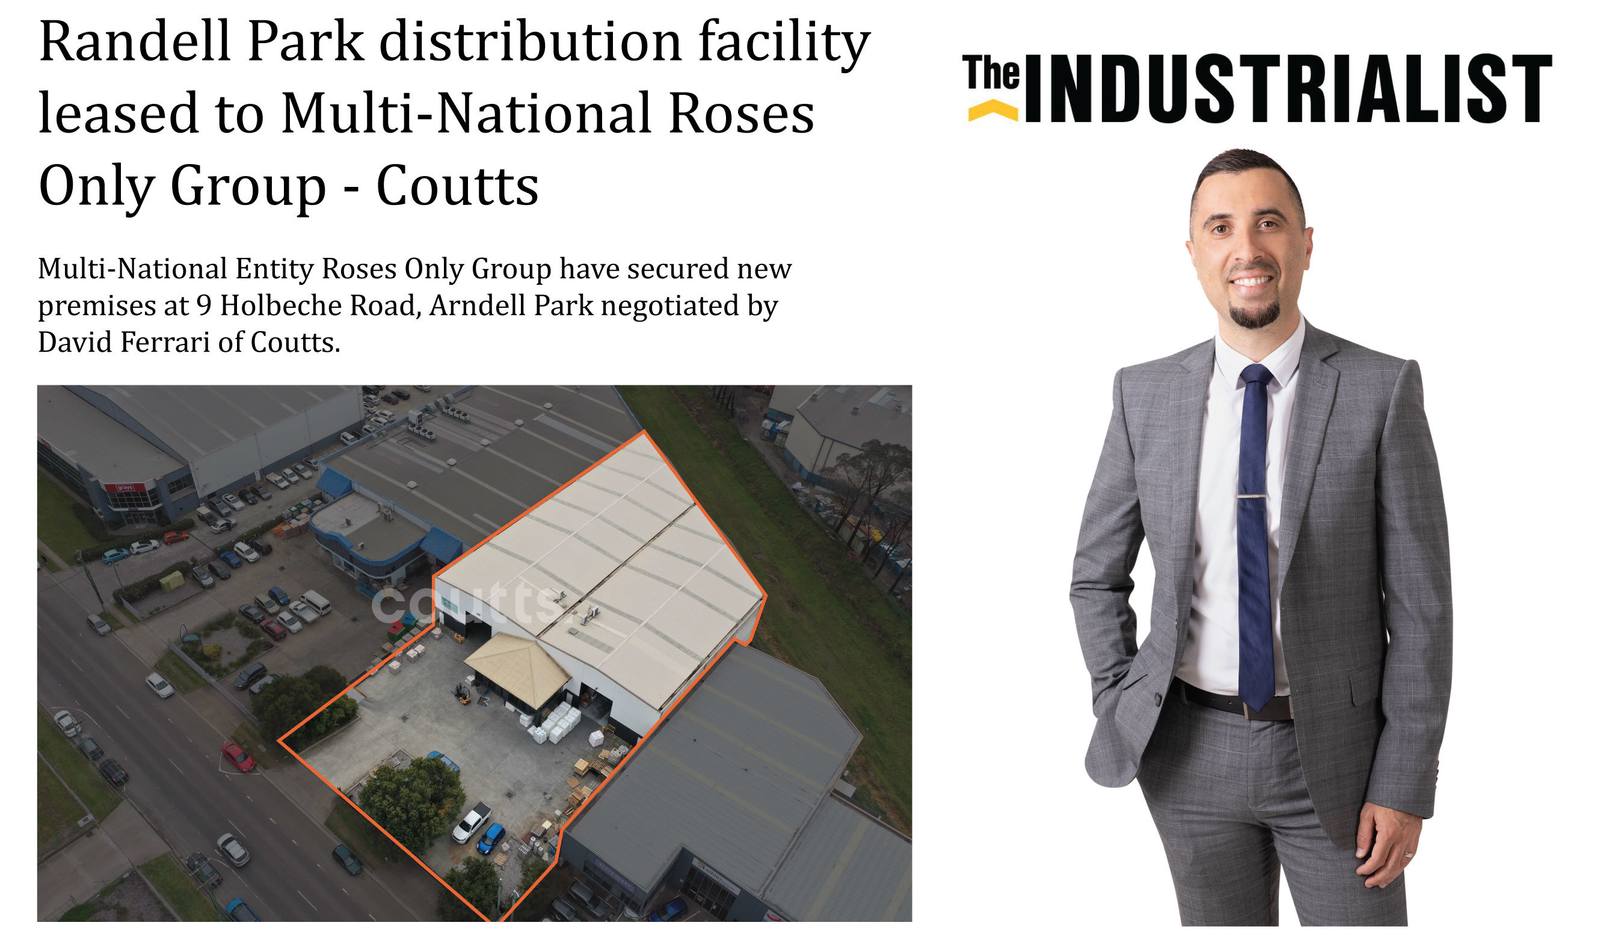 Randell Park distribution facility leased to Multi-National Roses Only Group - Coutts